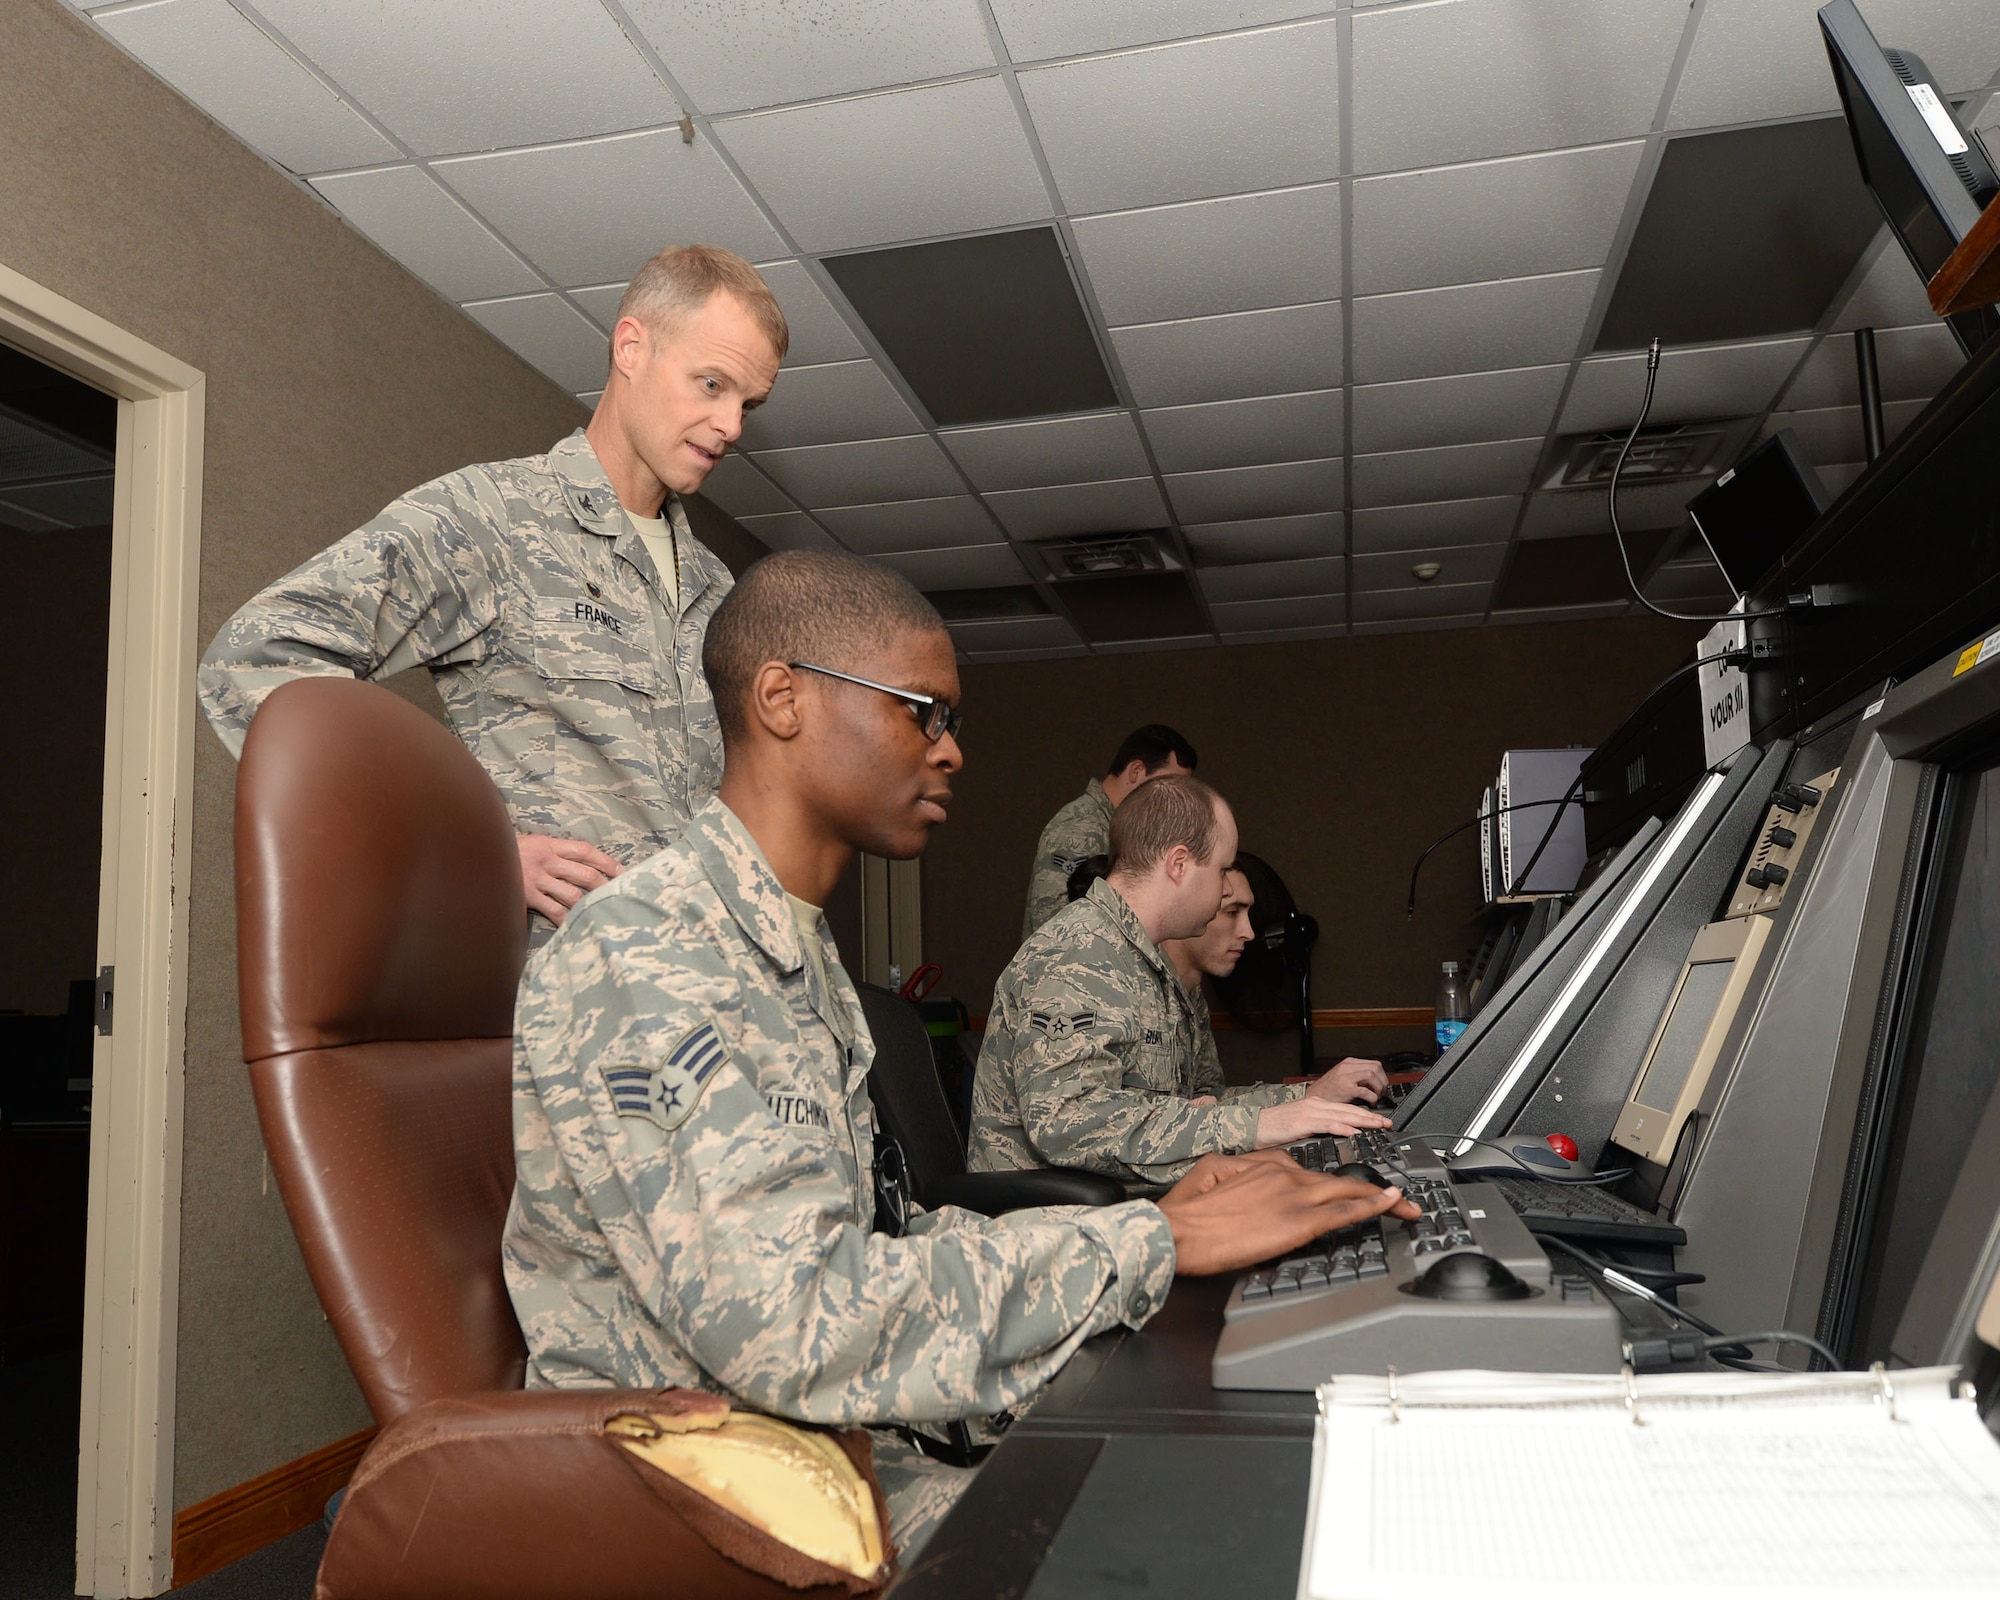 During the Airman’s Shadow Program, Col. Derek C. France, 325th Fighter Wing commander, observes Senior Airman Jonathan Hutchinson, 325th Operations Support Squadron air traffic controller, while he runs a simulation that trains air traffic controller trainees on how to coordinate jets in the air March 29, 2016. The Airman's Shadow program is a 325th FW commander program designed to recognize members of Team Tyndall. The program provides an opportunity for the commander to meet with the Airmen and get a first-hand look at what Tyndall Airmen are doing. (U.S. Air Force photo by Airman 1st Class Cody R. Miller/Released)